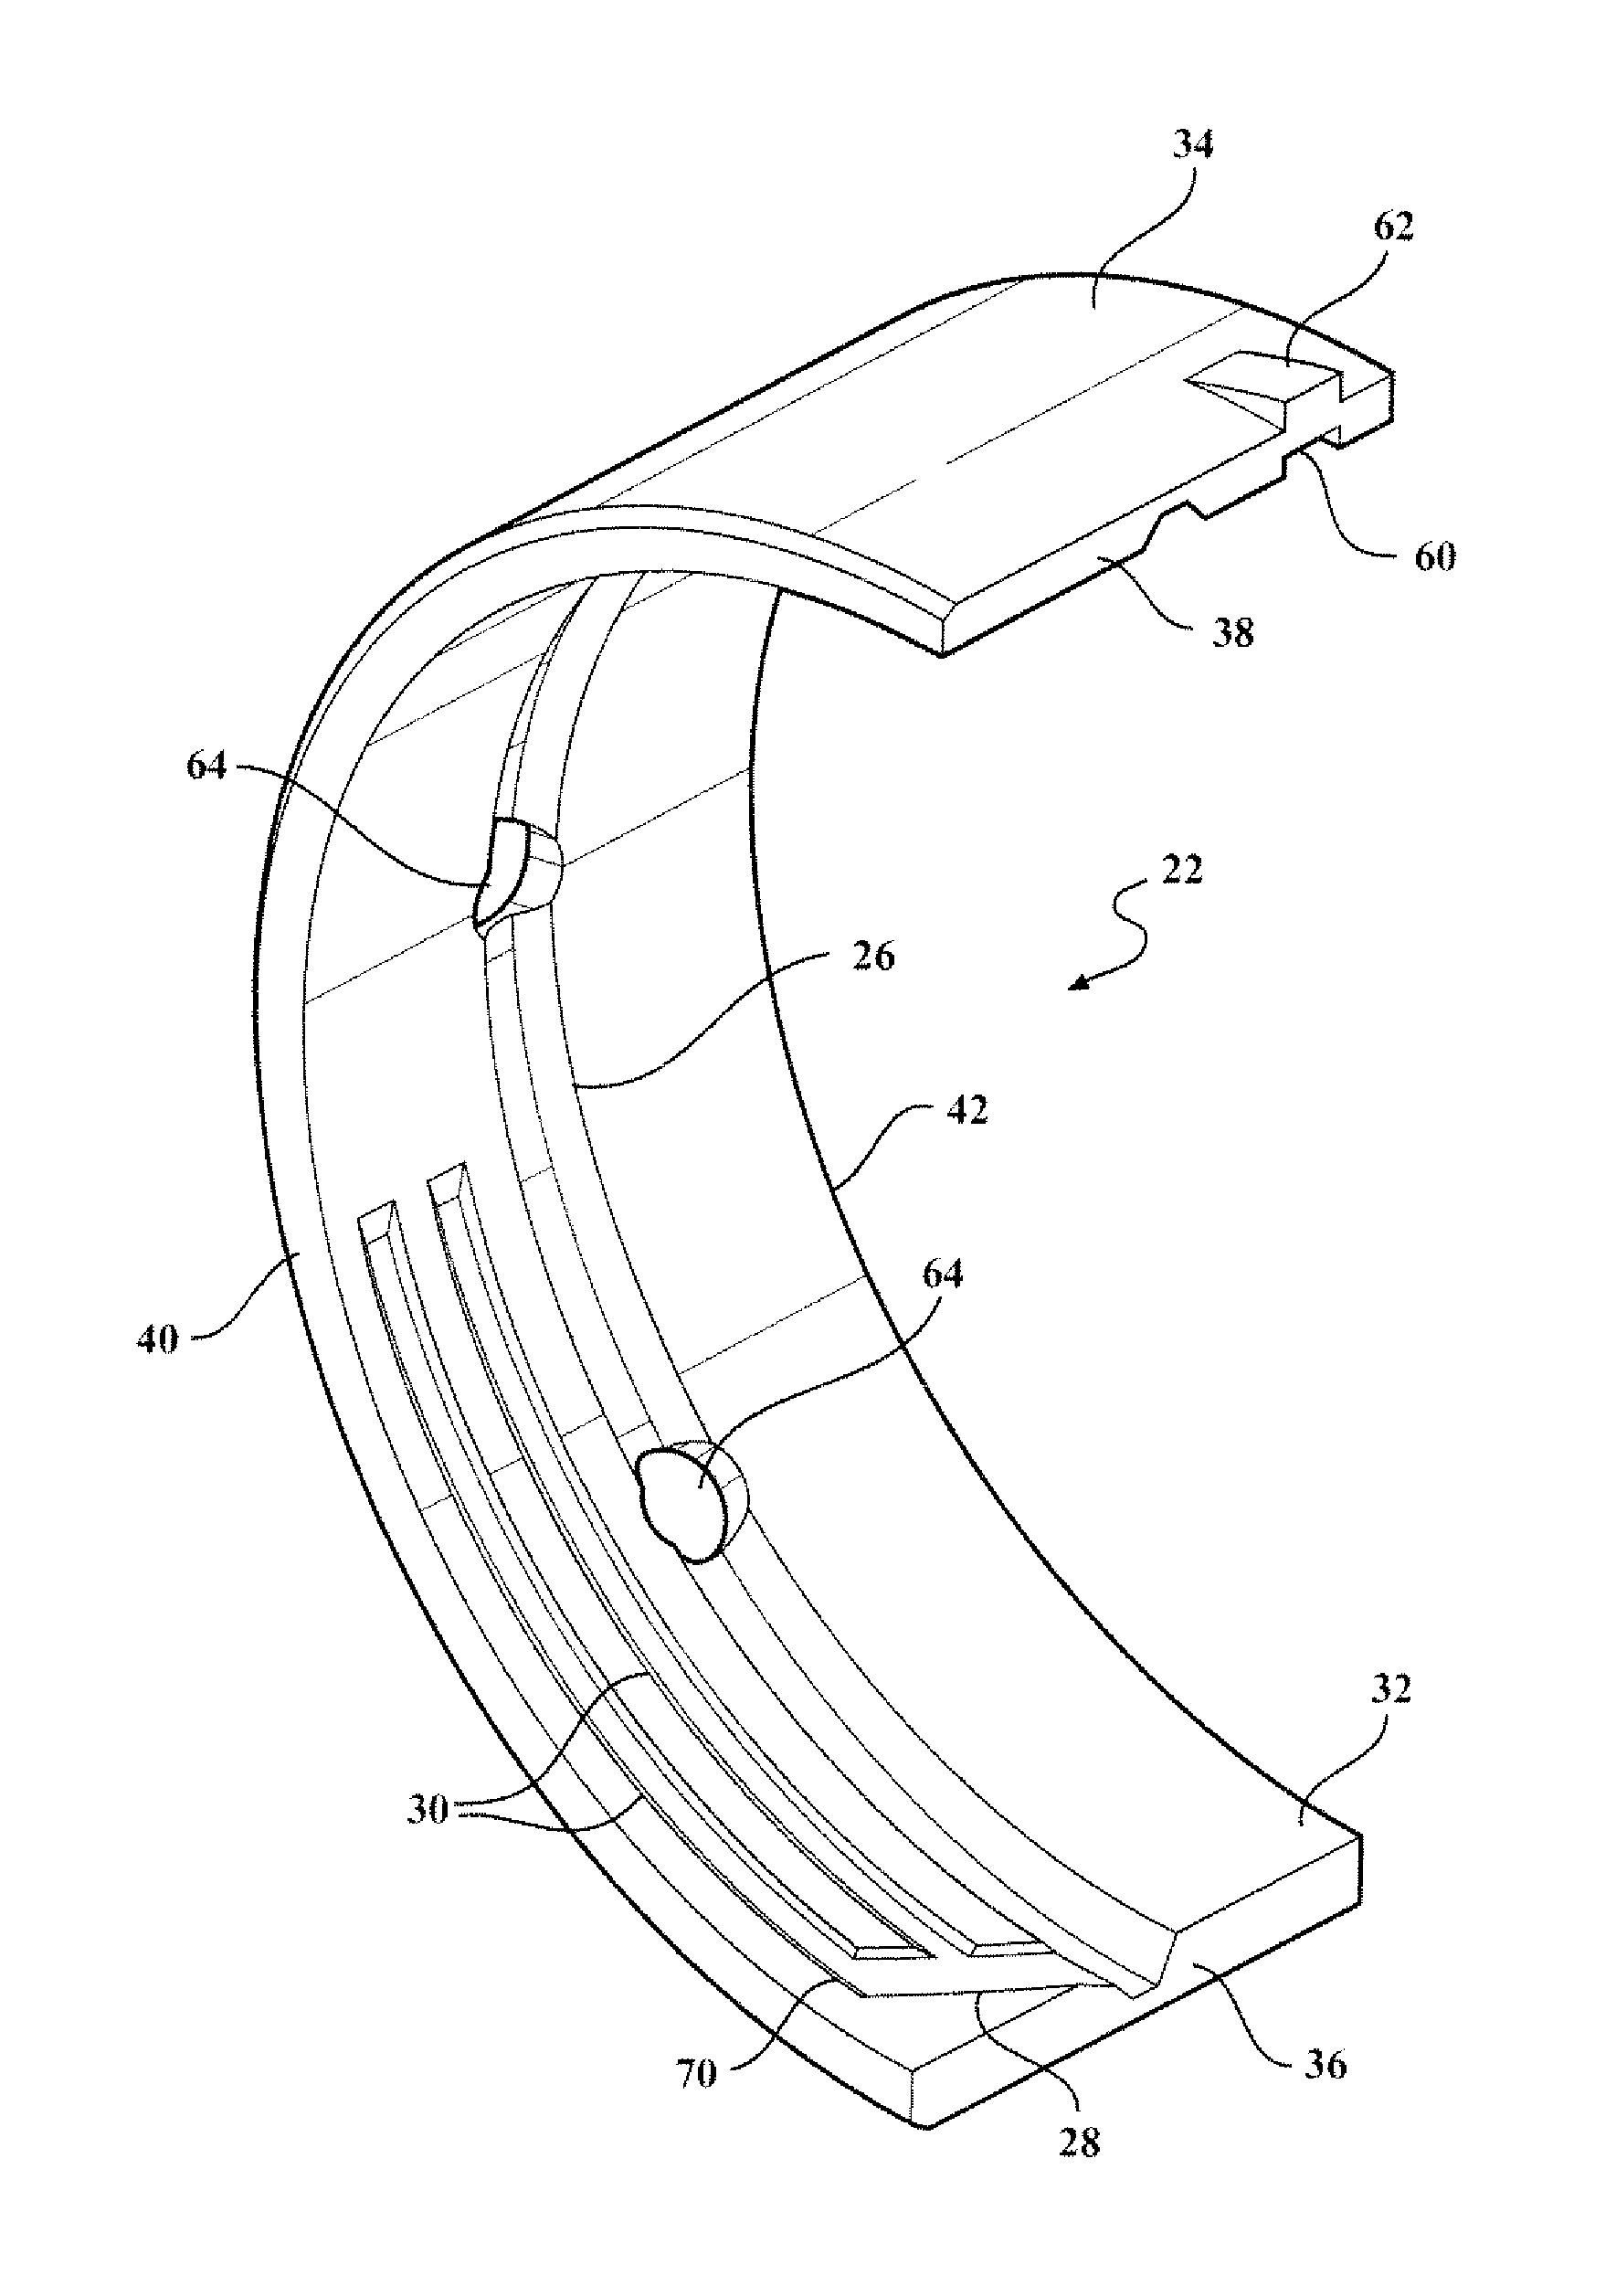 Main bearing for engine with high belt load